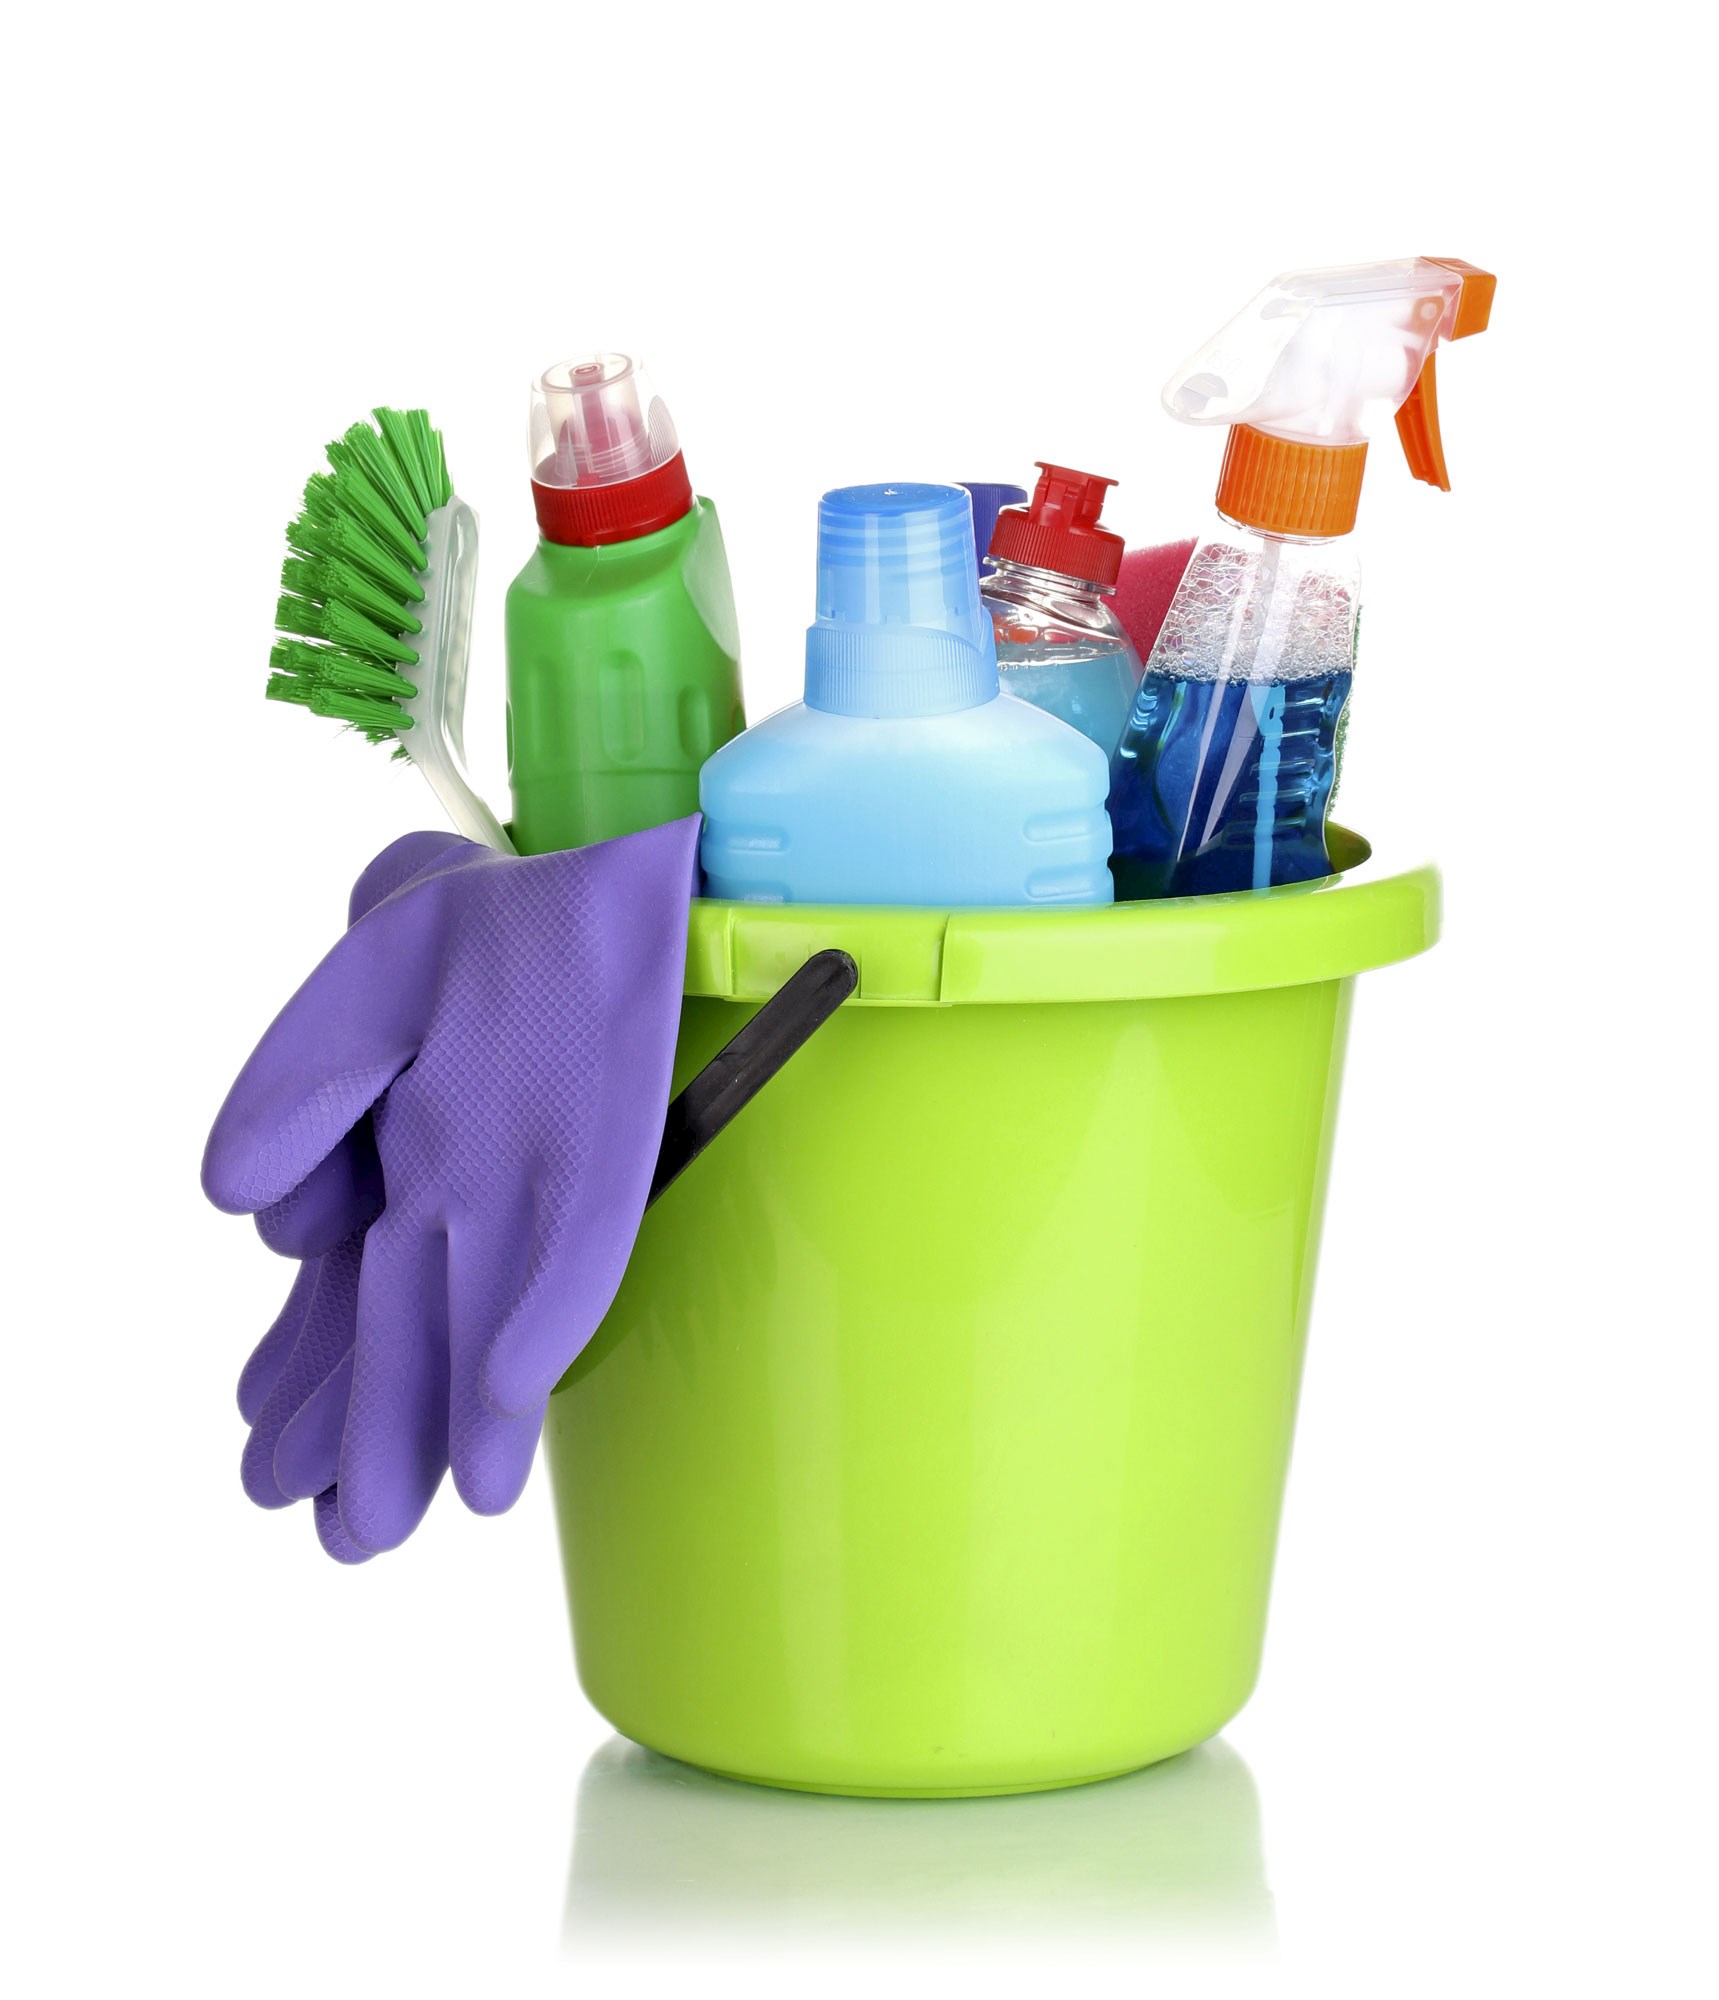 There is a light green plastic bucket. In it, there are different cleaning products, a brush and purple rubber gloves.